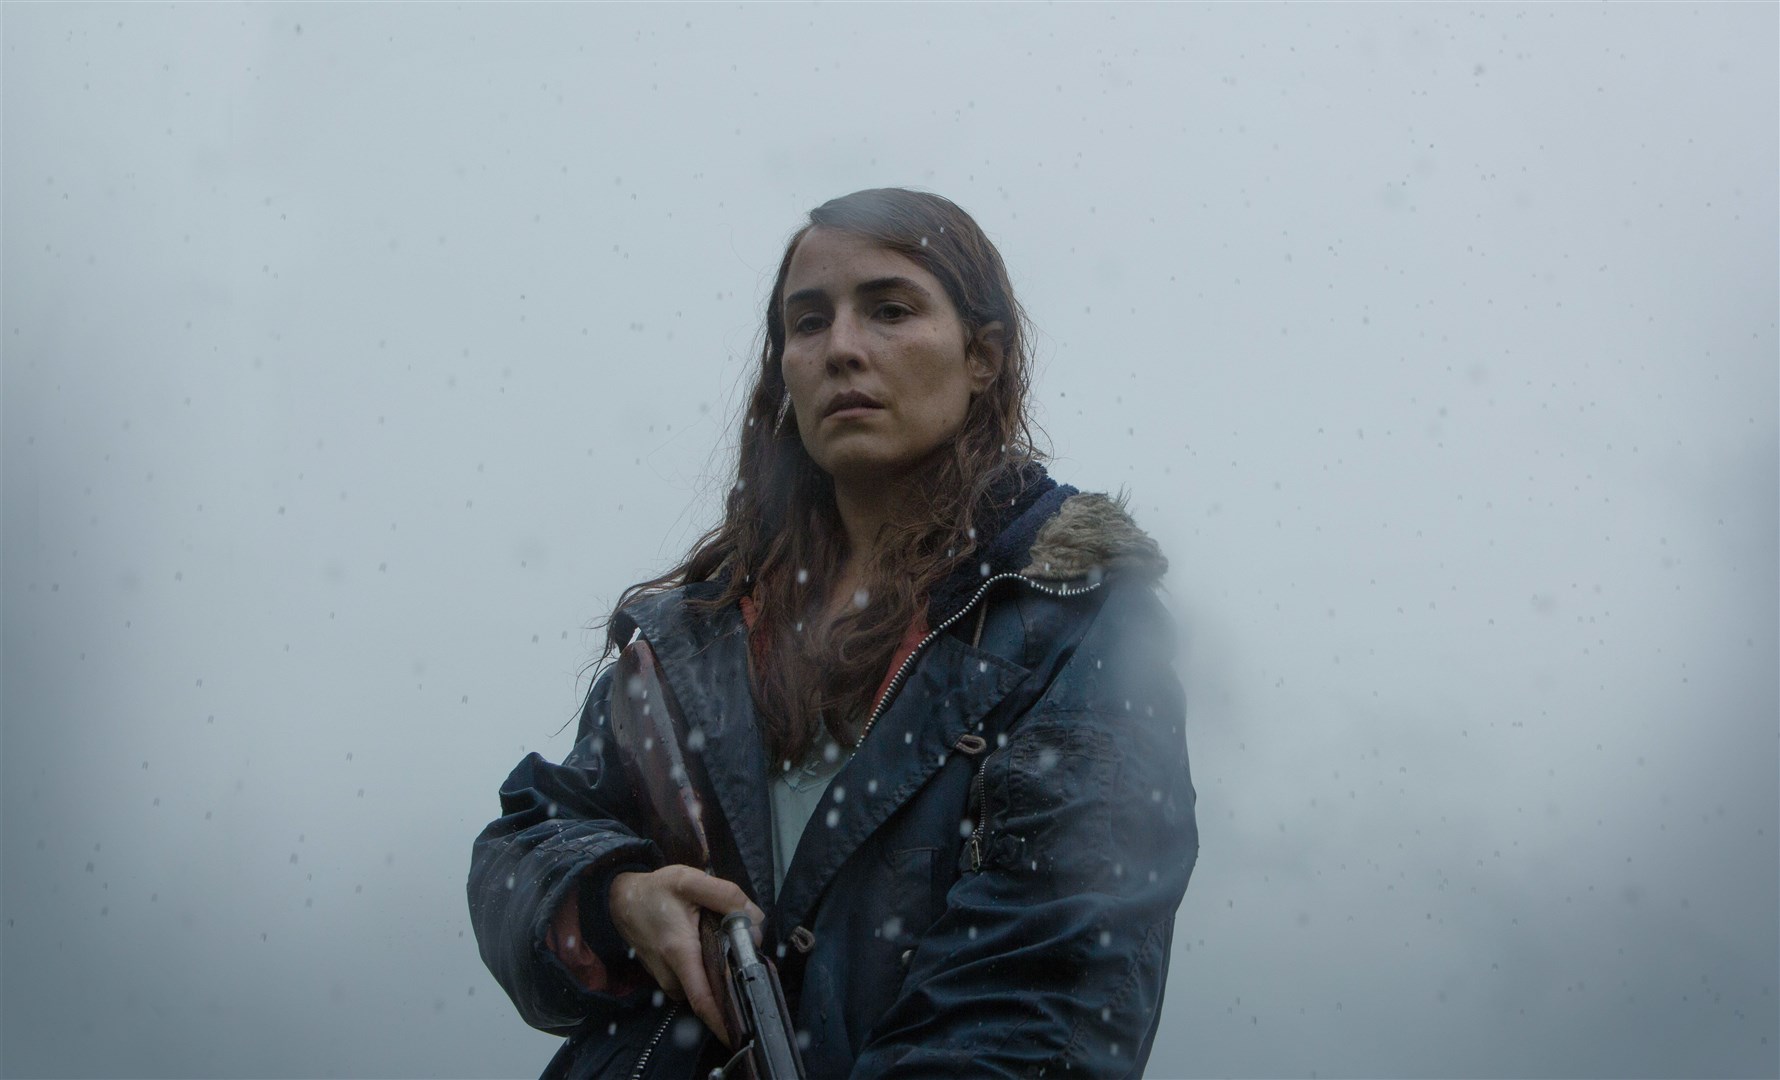 The festival visits Iceland for the striking Noomi Rapace-starring horror, Lamb.